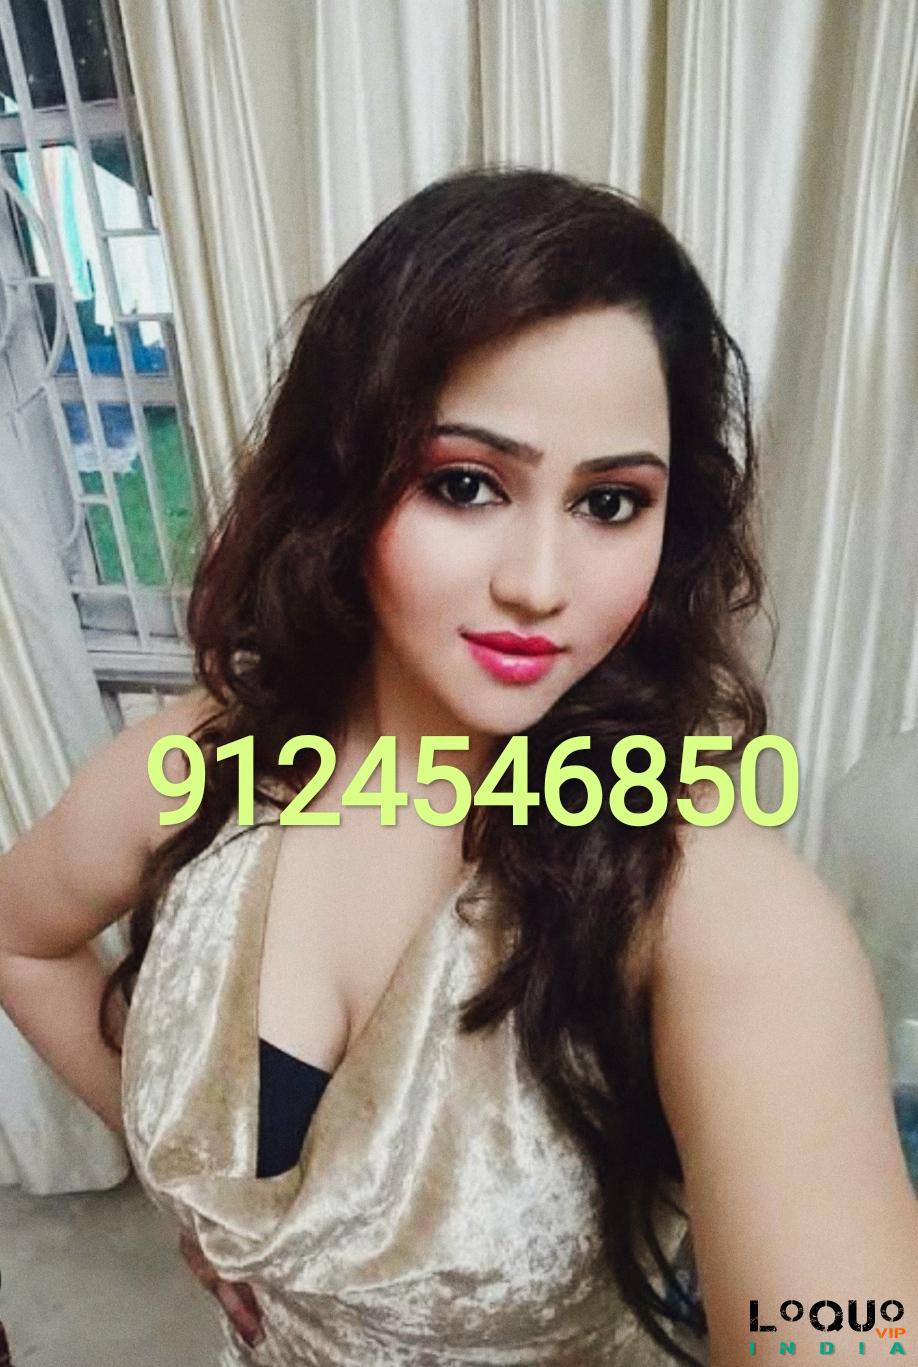 Call Girls Gujarat: LIVE NUDE_video CALLING SERVICES 9124546850 FULL NUDE CALL HERE